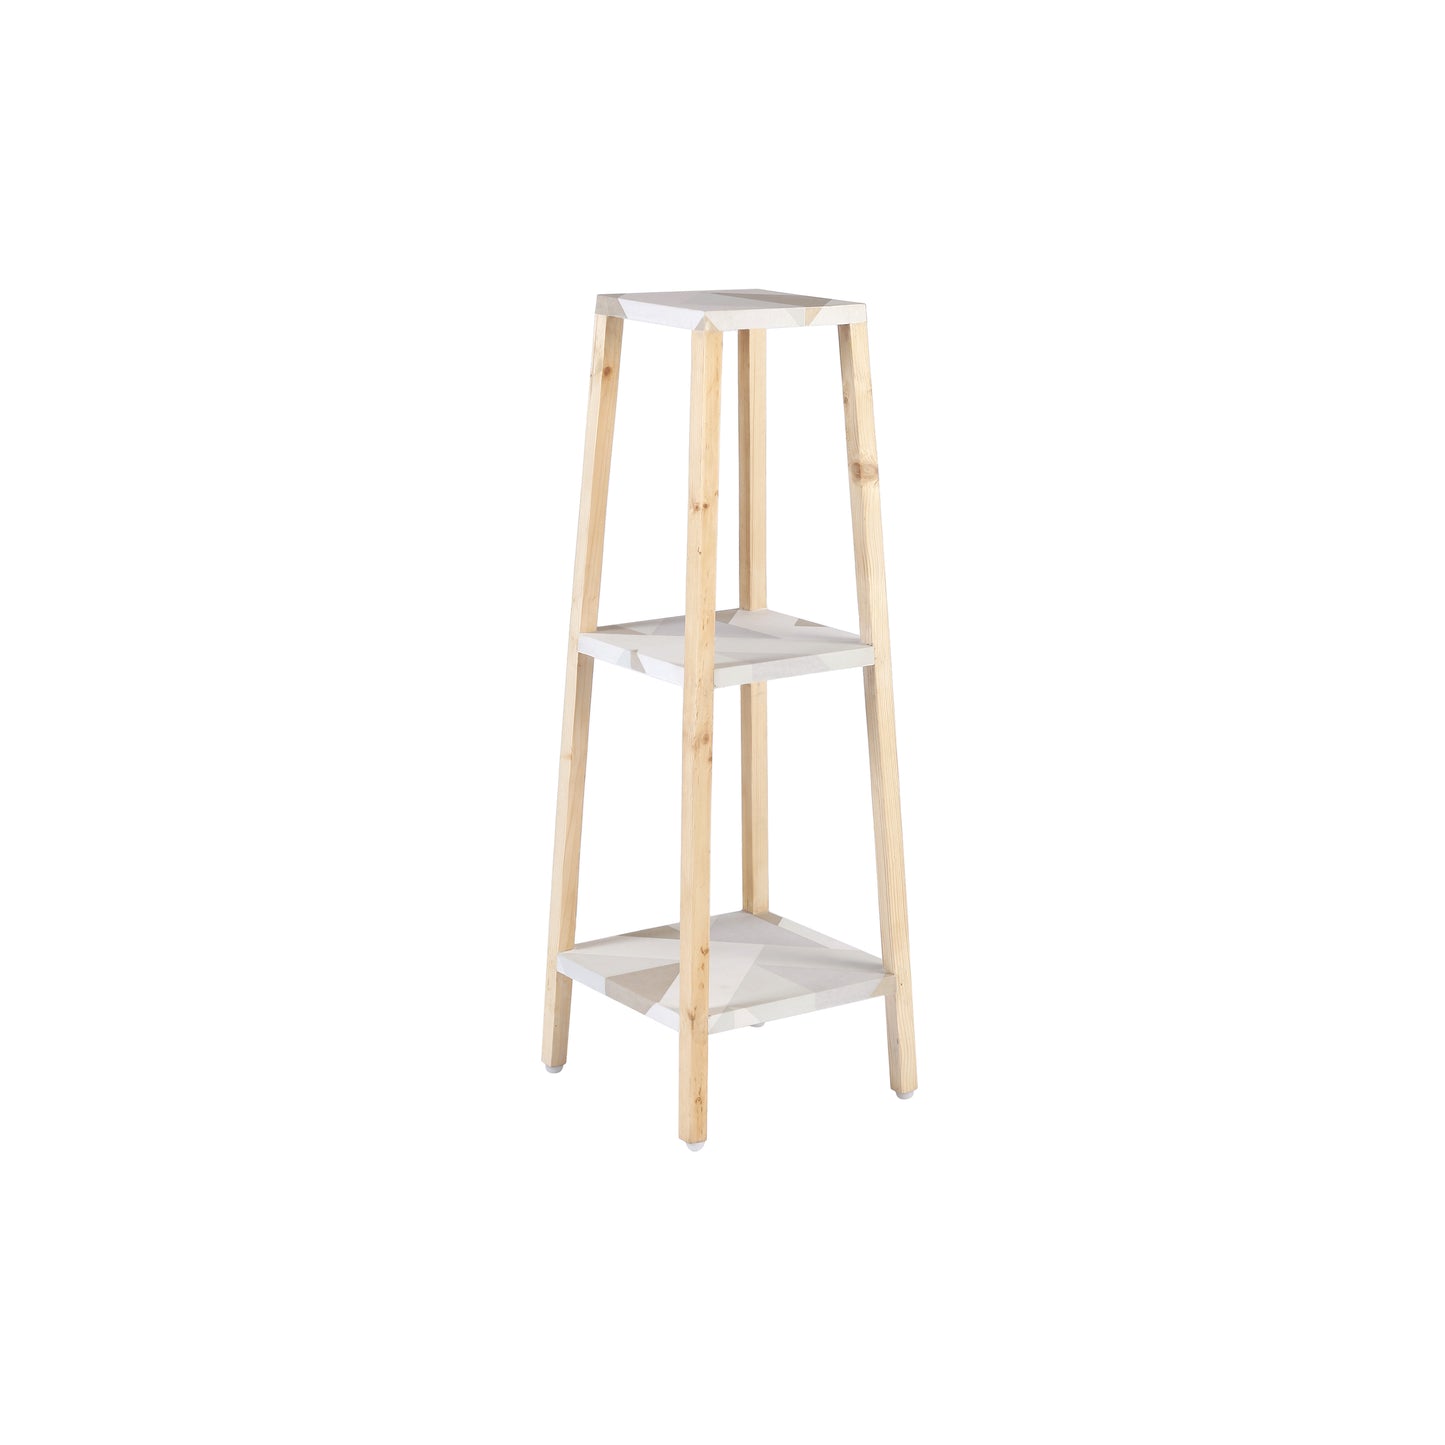 A Tiny Mistake Square Four Legged Tapering Three Tier Decorative Stand (Three Tiers) (Geometric Base with Light Legs)